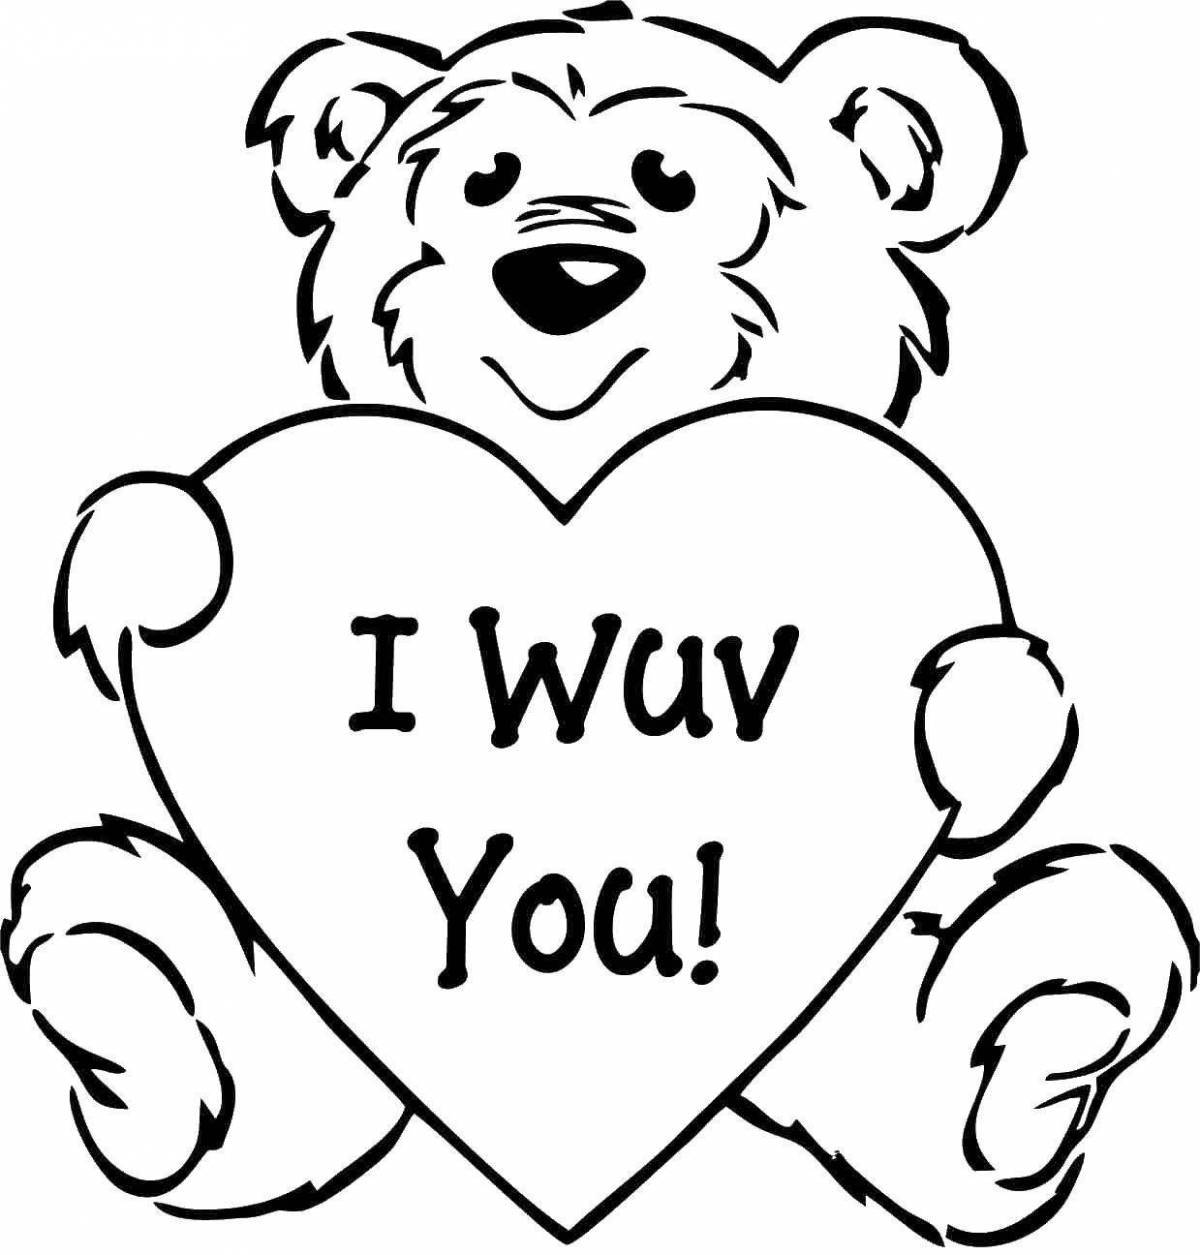 Coloring page friendly bear with a heart